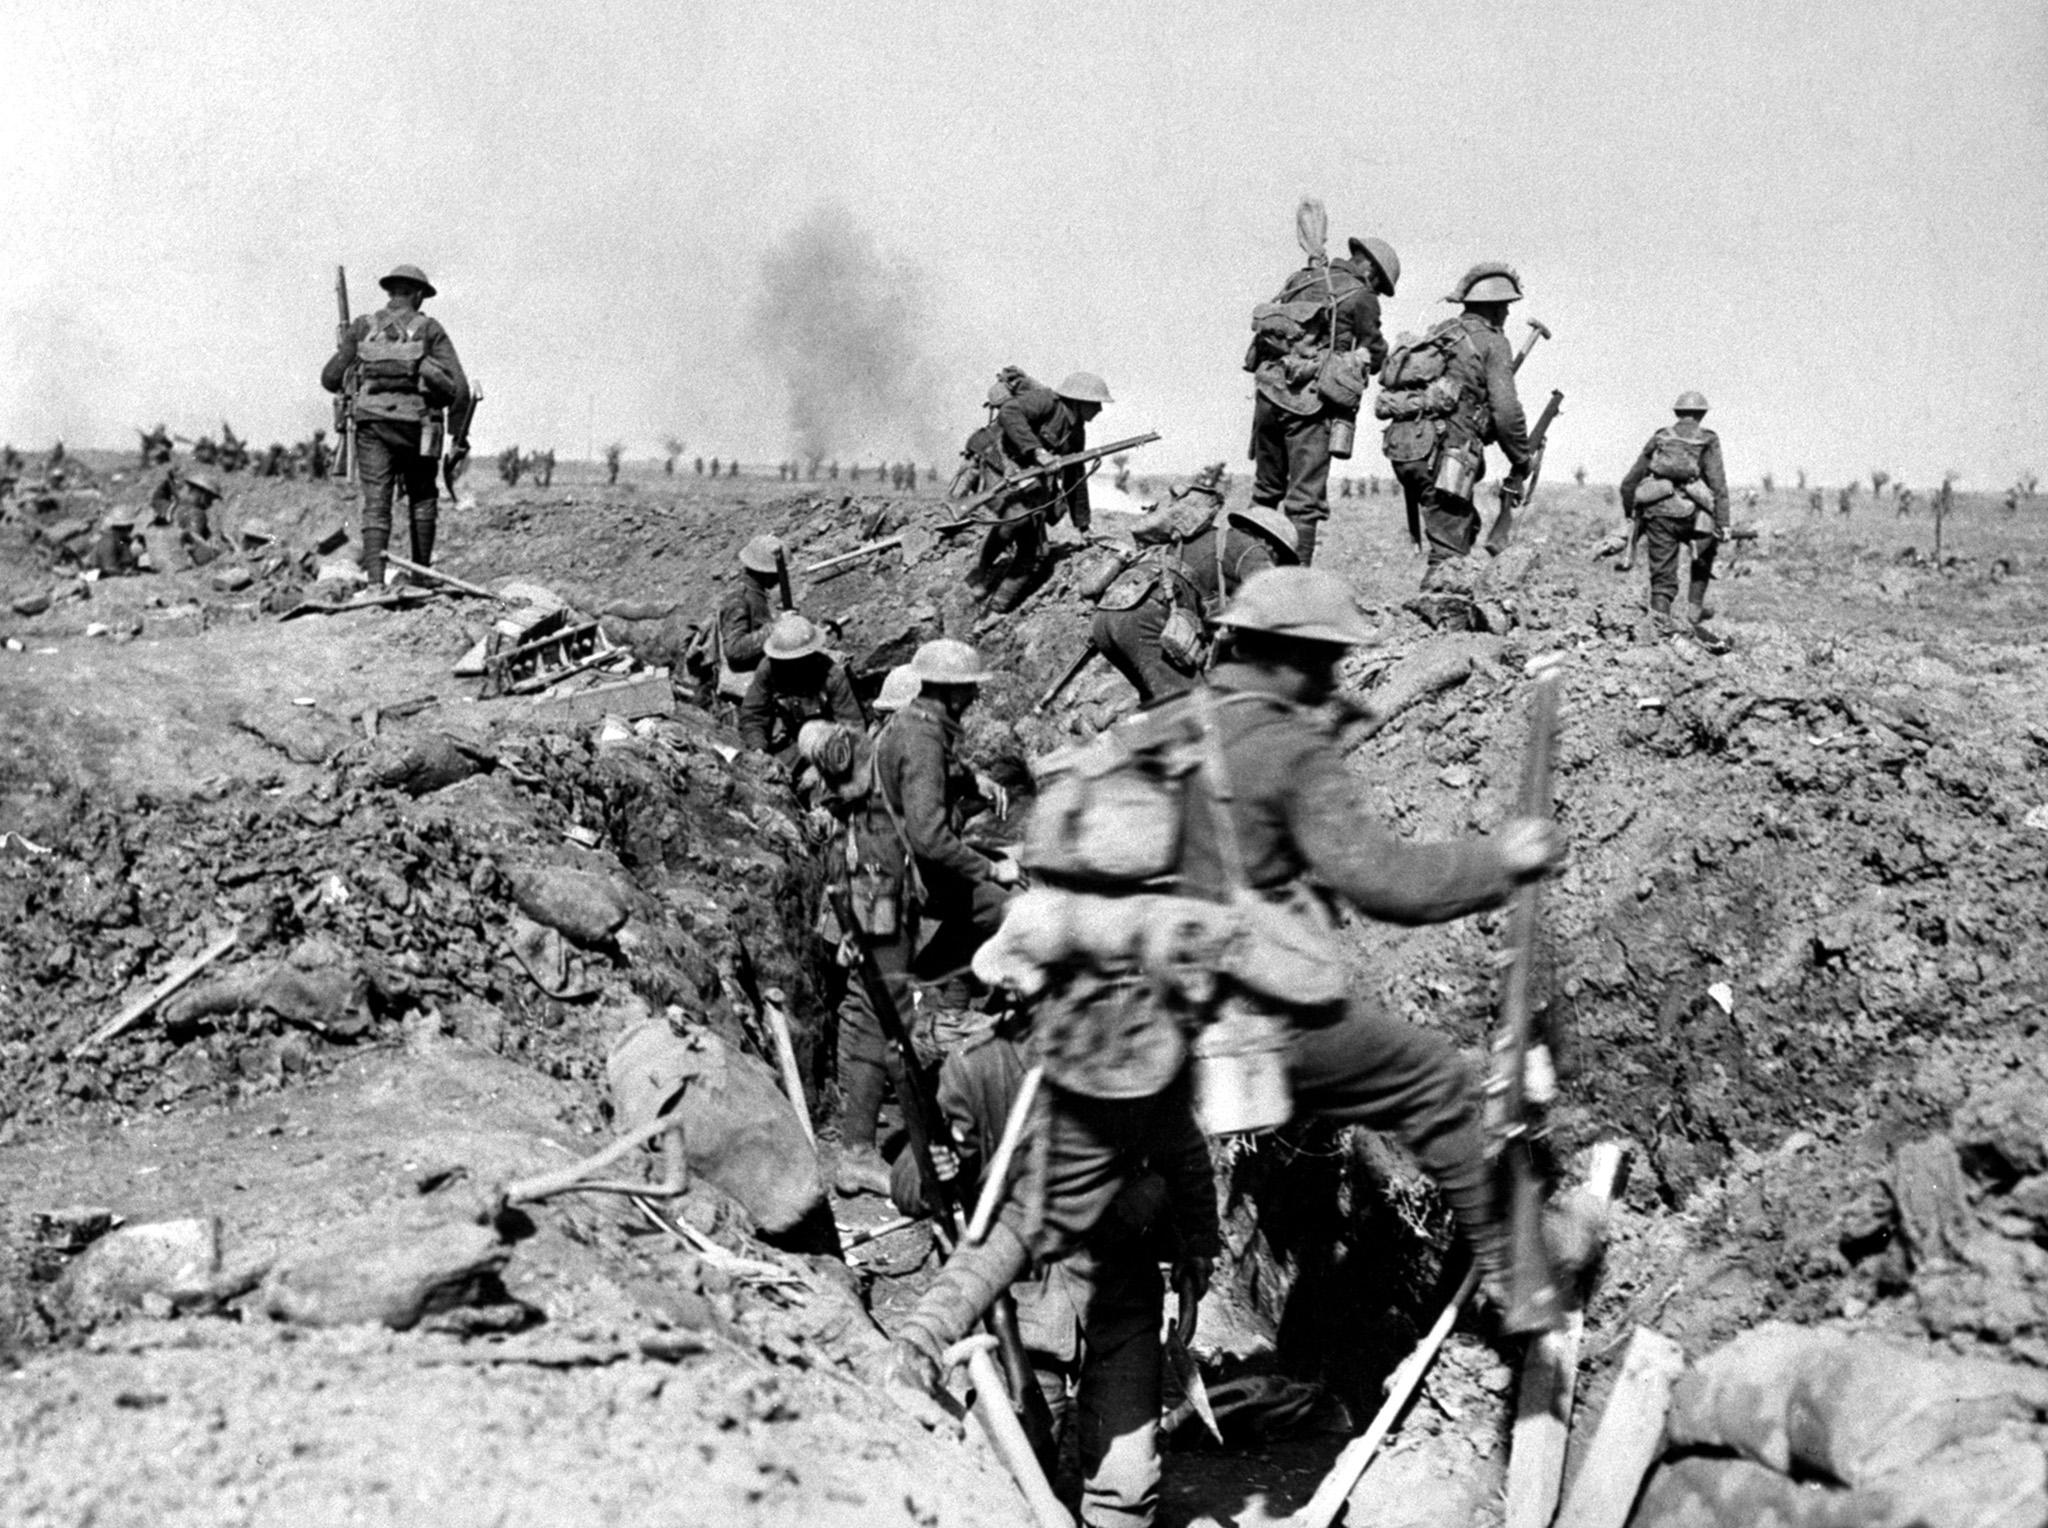 Troops of the British XIV Corps, advancing near Ginchy, during the Battle of Morval, part of the Somme Offensive